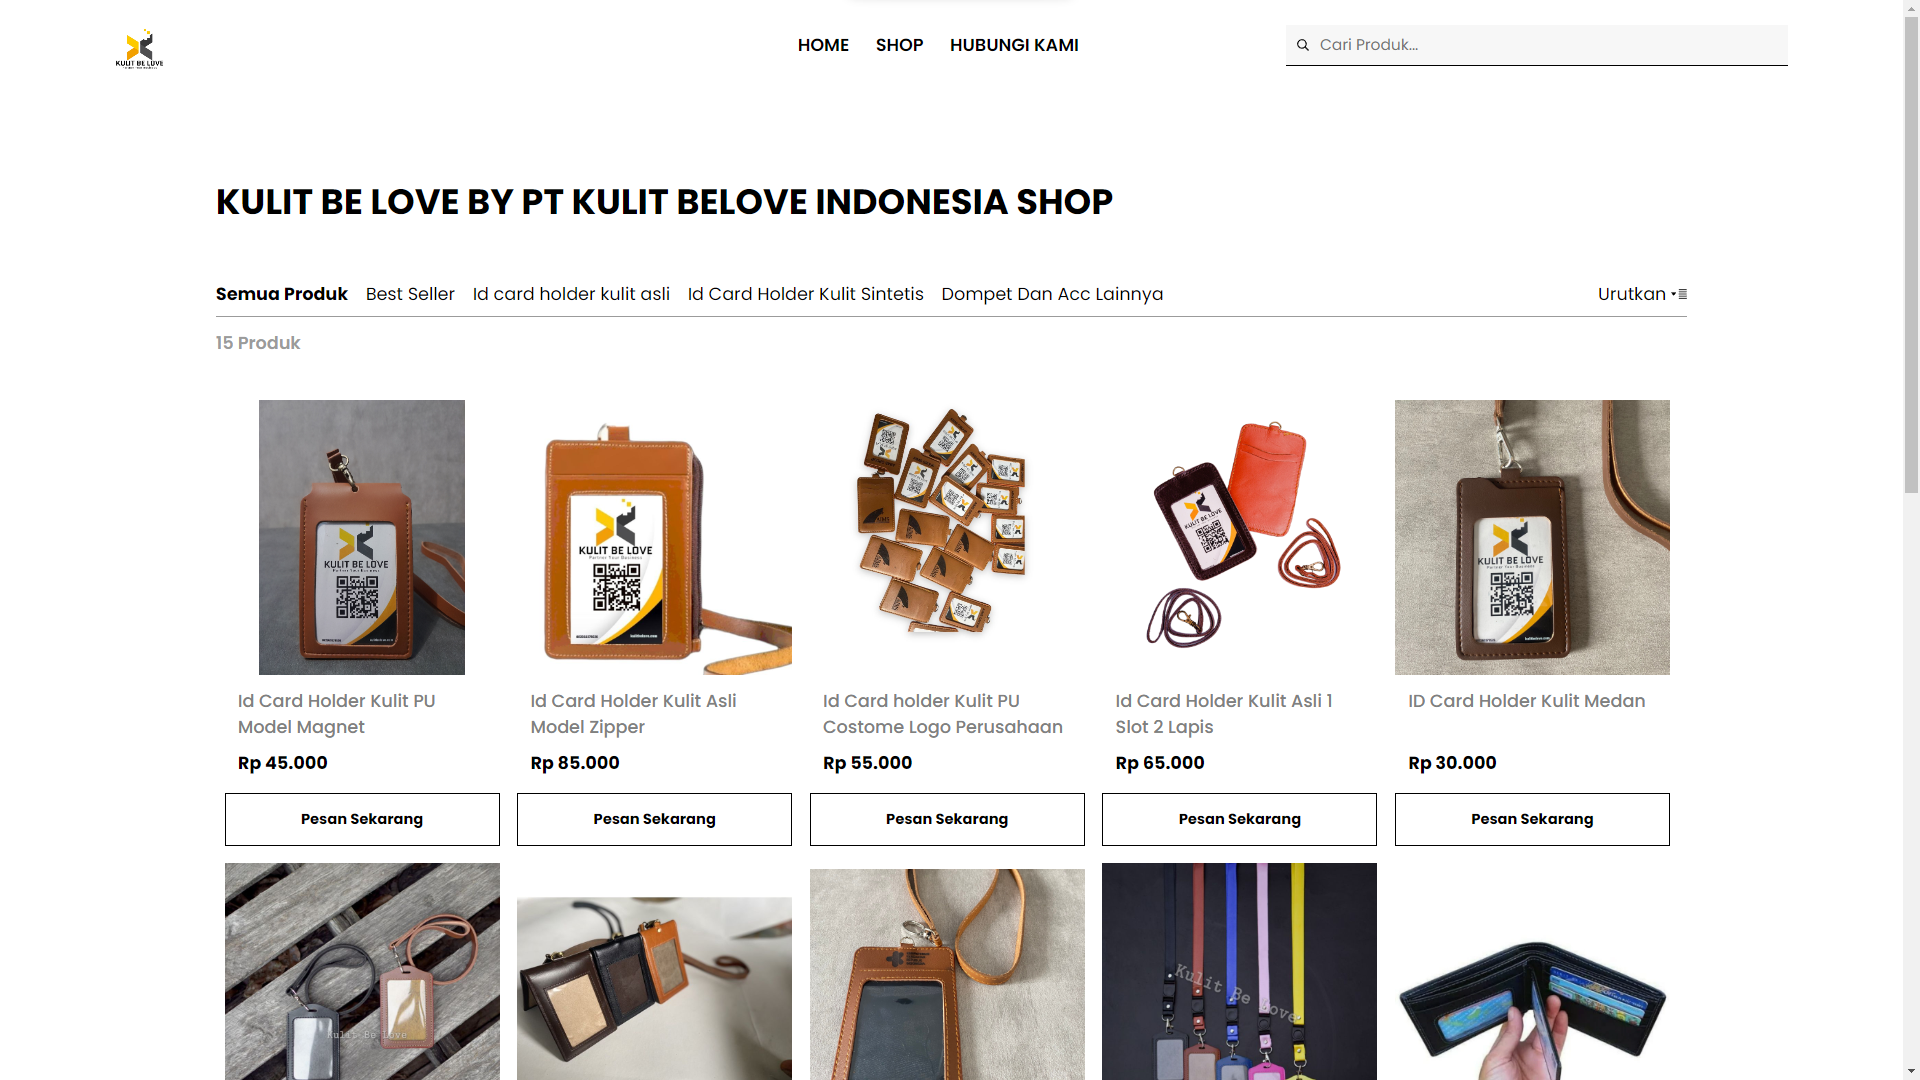 E-commerce website for retail business with Minimalist design.